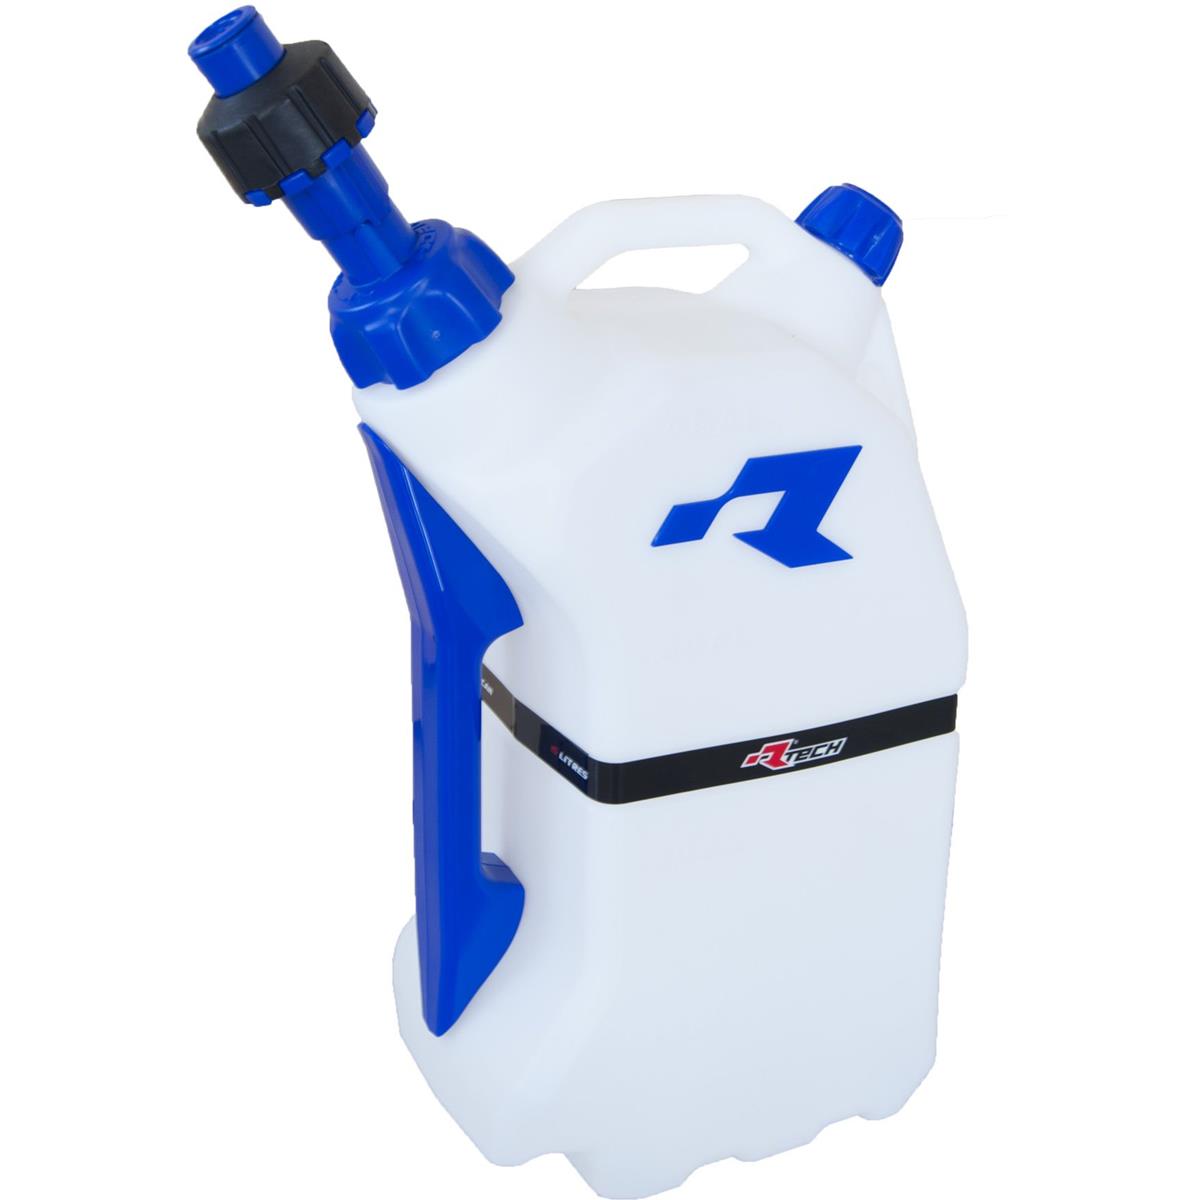 RTECH Gas Can R15 with Quick Tank System, 15 L, Blue